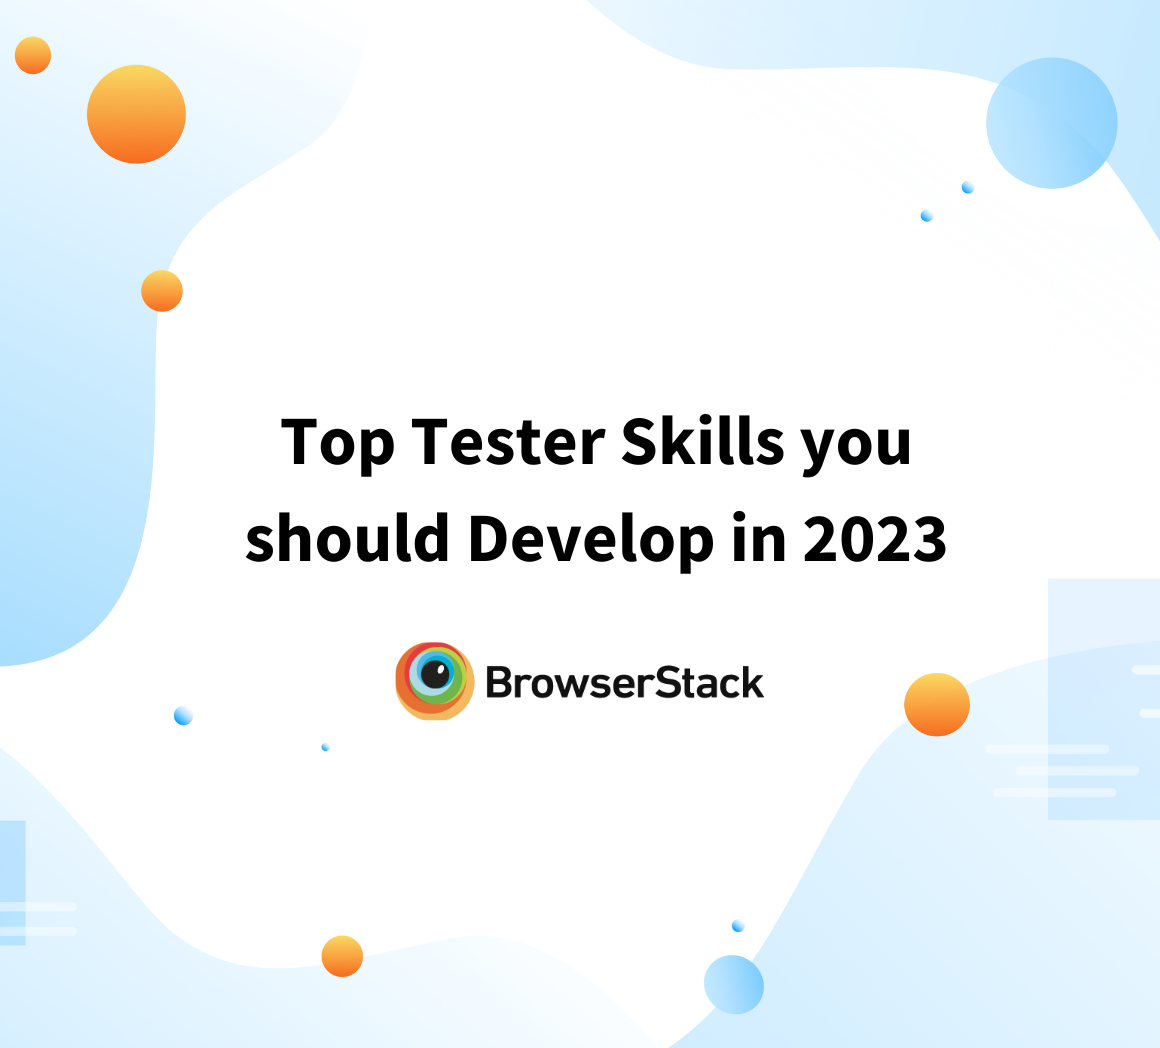 Top Tester Skills you should Develop in 2023